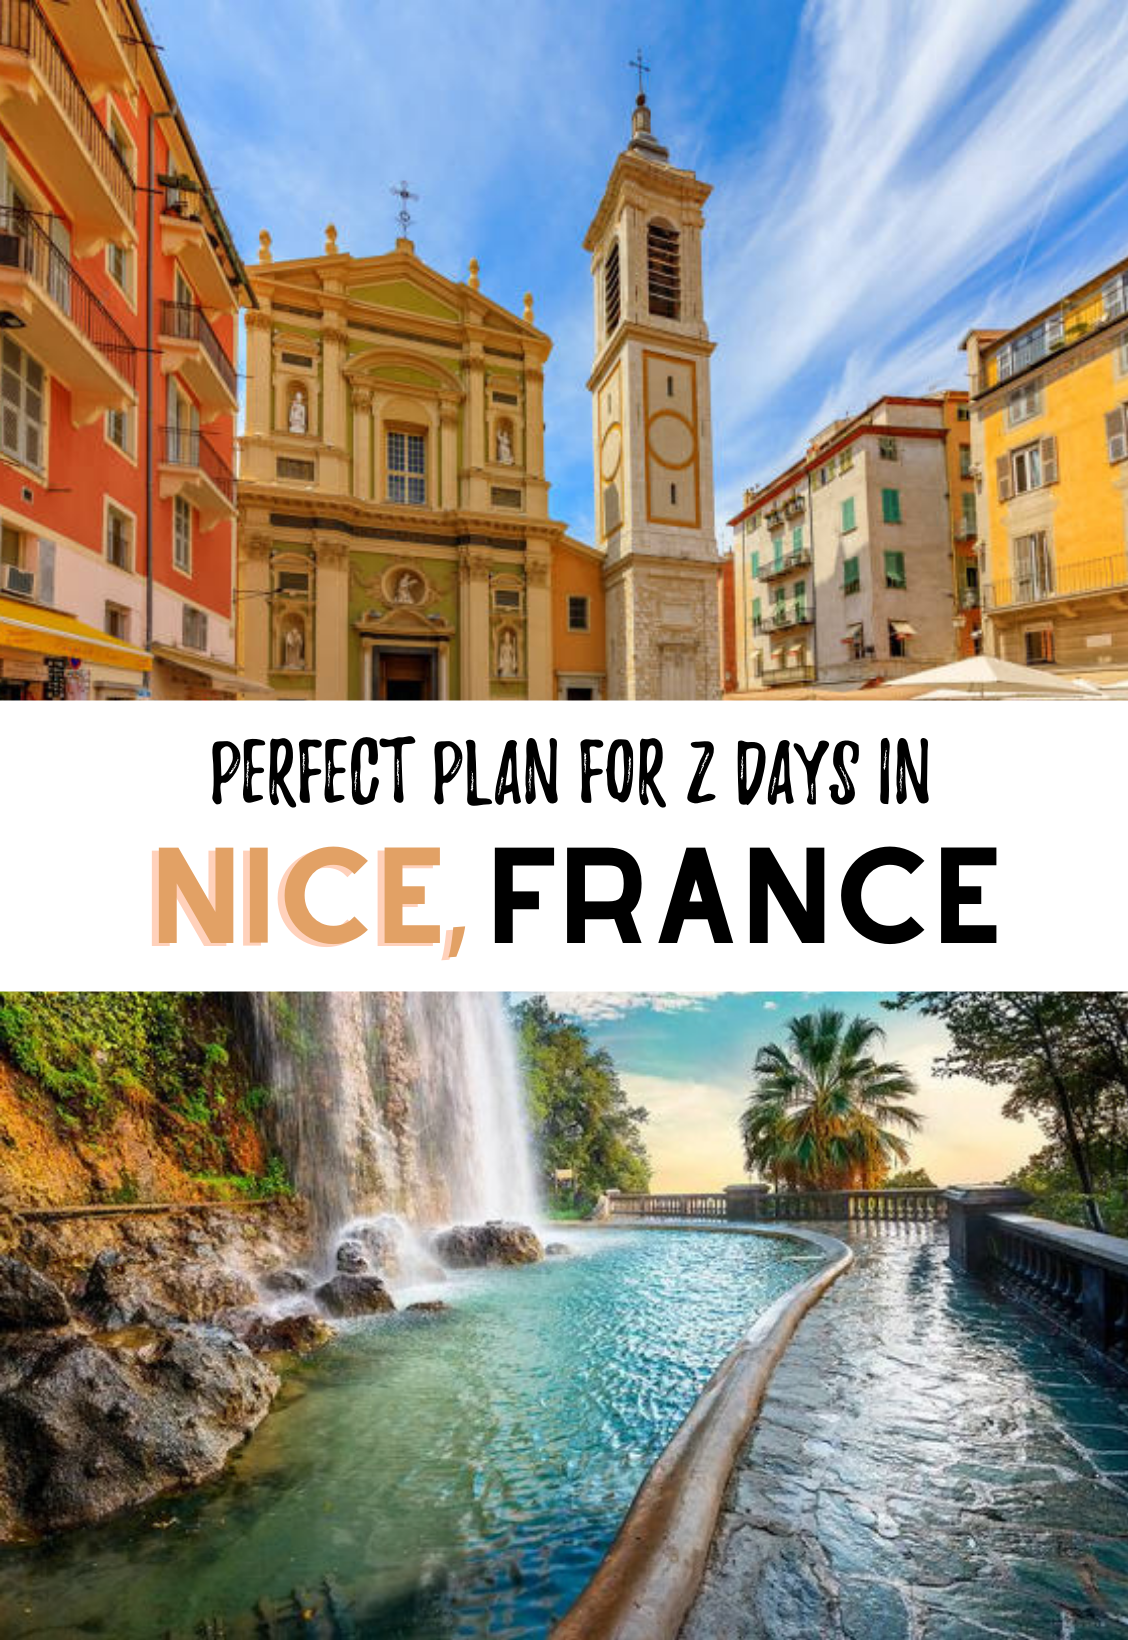 Perfect plan for 2 Days in Nice, France